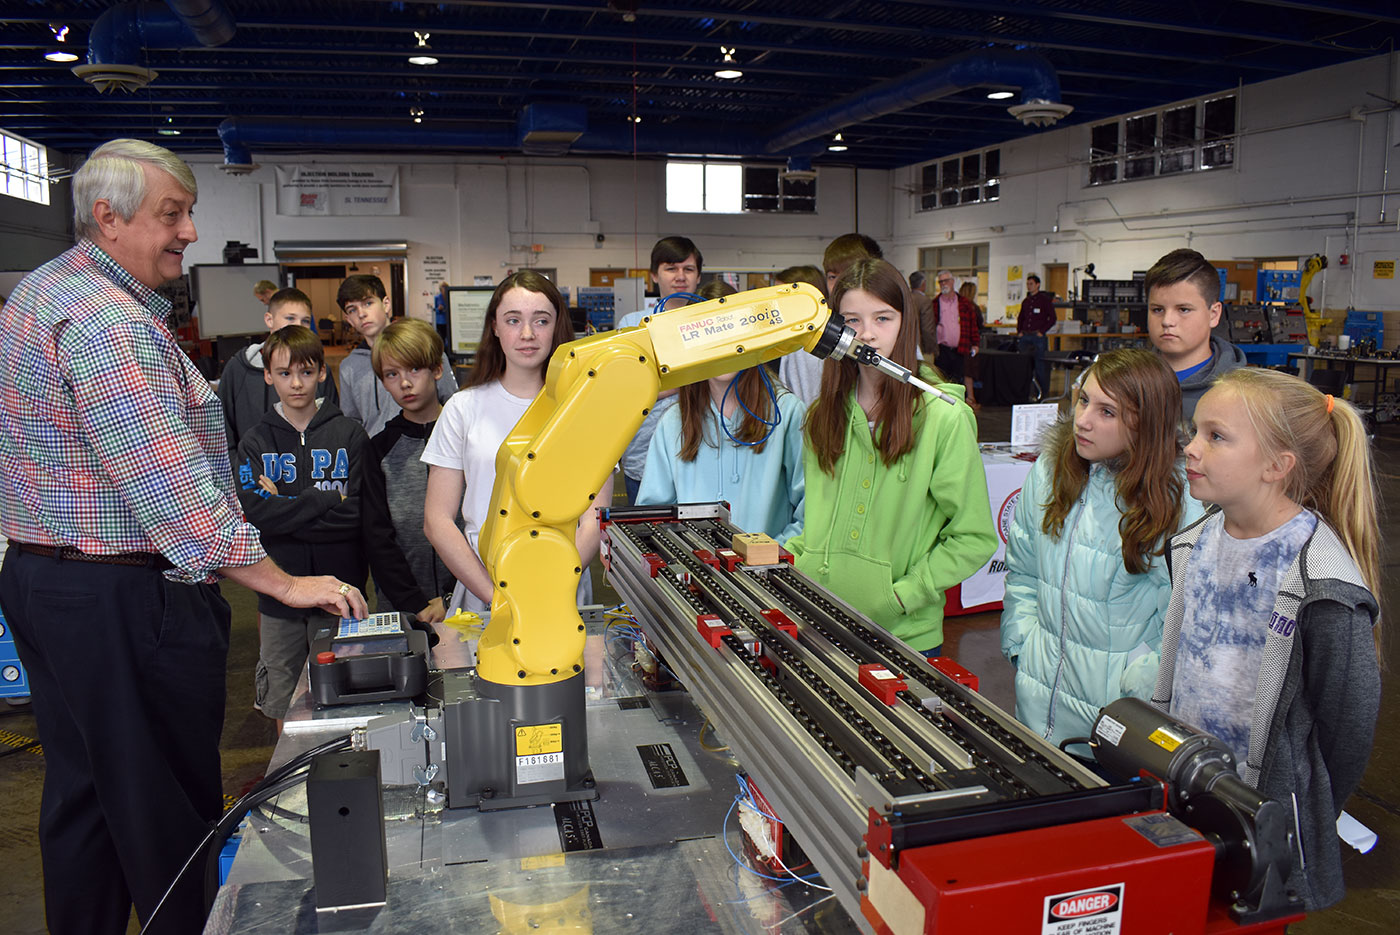 Gordon Williams, left, director of the mechatronics program for Roane State, operates a robotic arm for middle school students participating in the kickoff of the “Dream It. Do It.” competition.